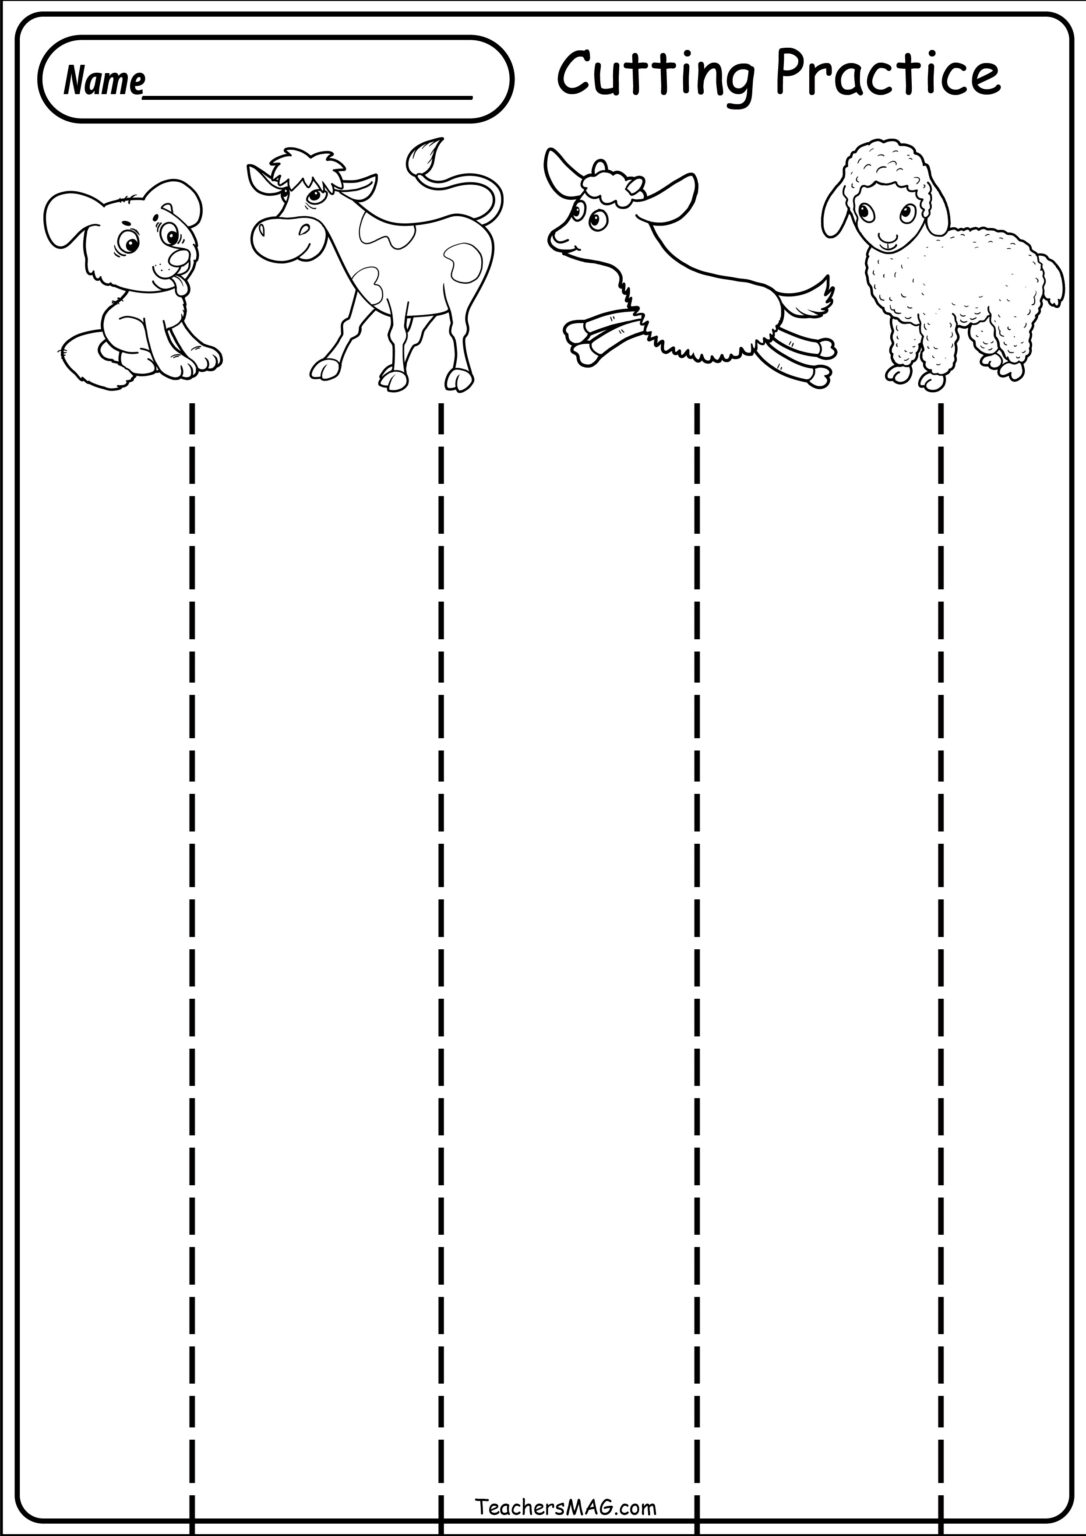 printable-cutting-and-pasting-worksheets-for-preschoolers-pdf-printable-worksheets